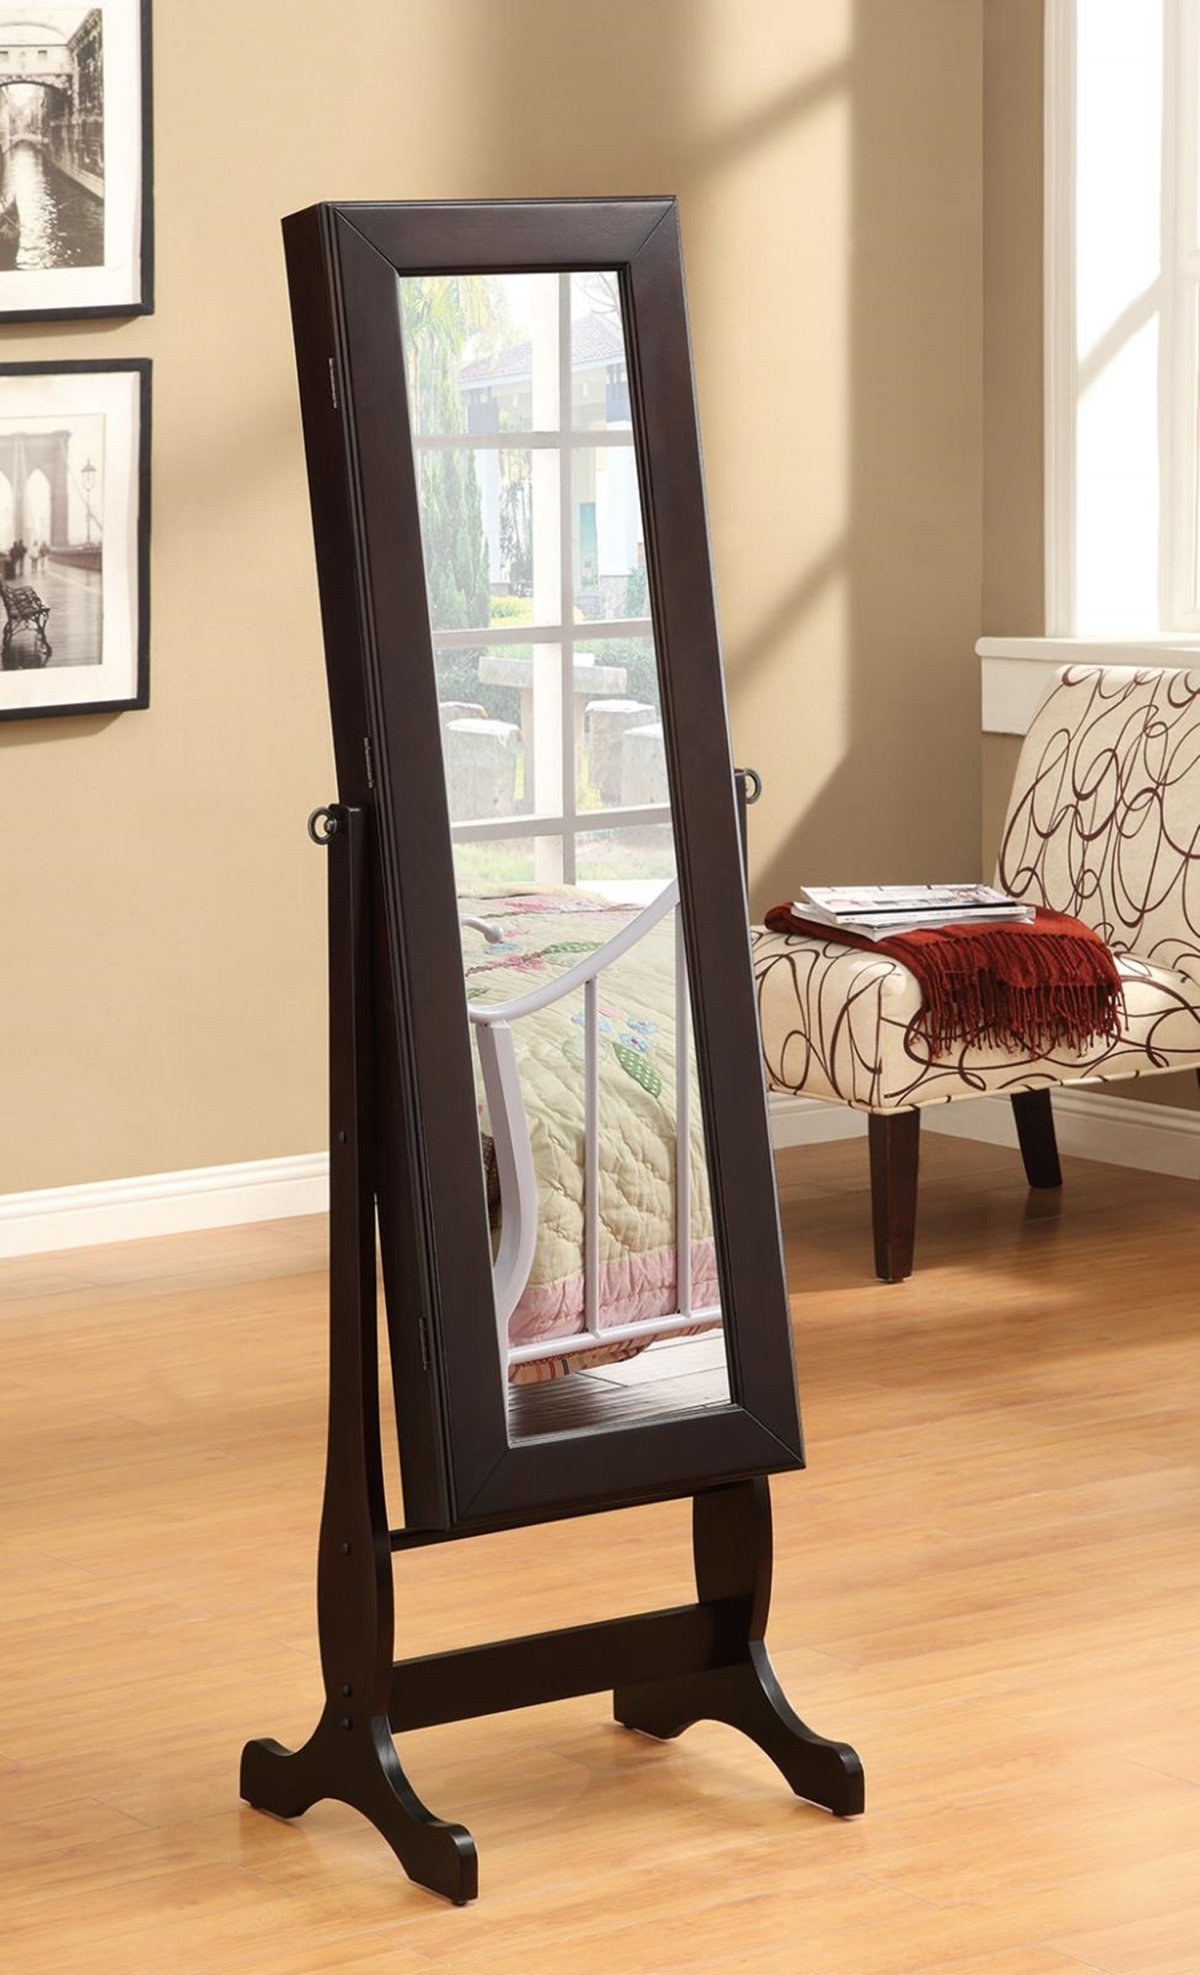 Capp. Cheval Mirror and Jewelry Armoire